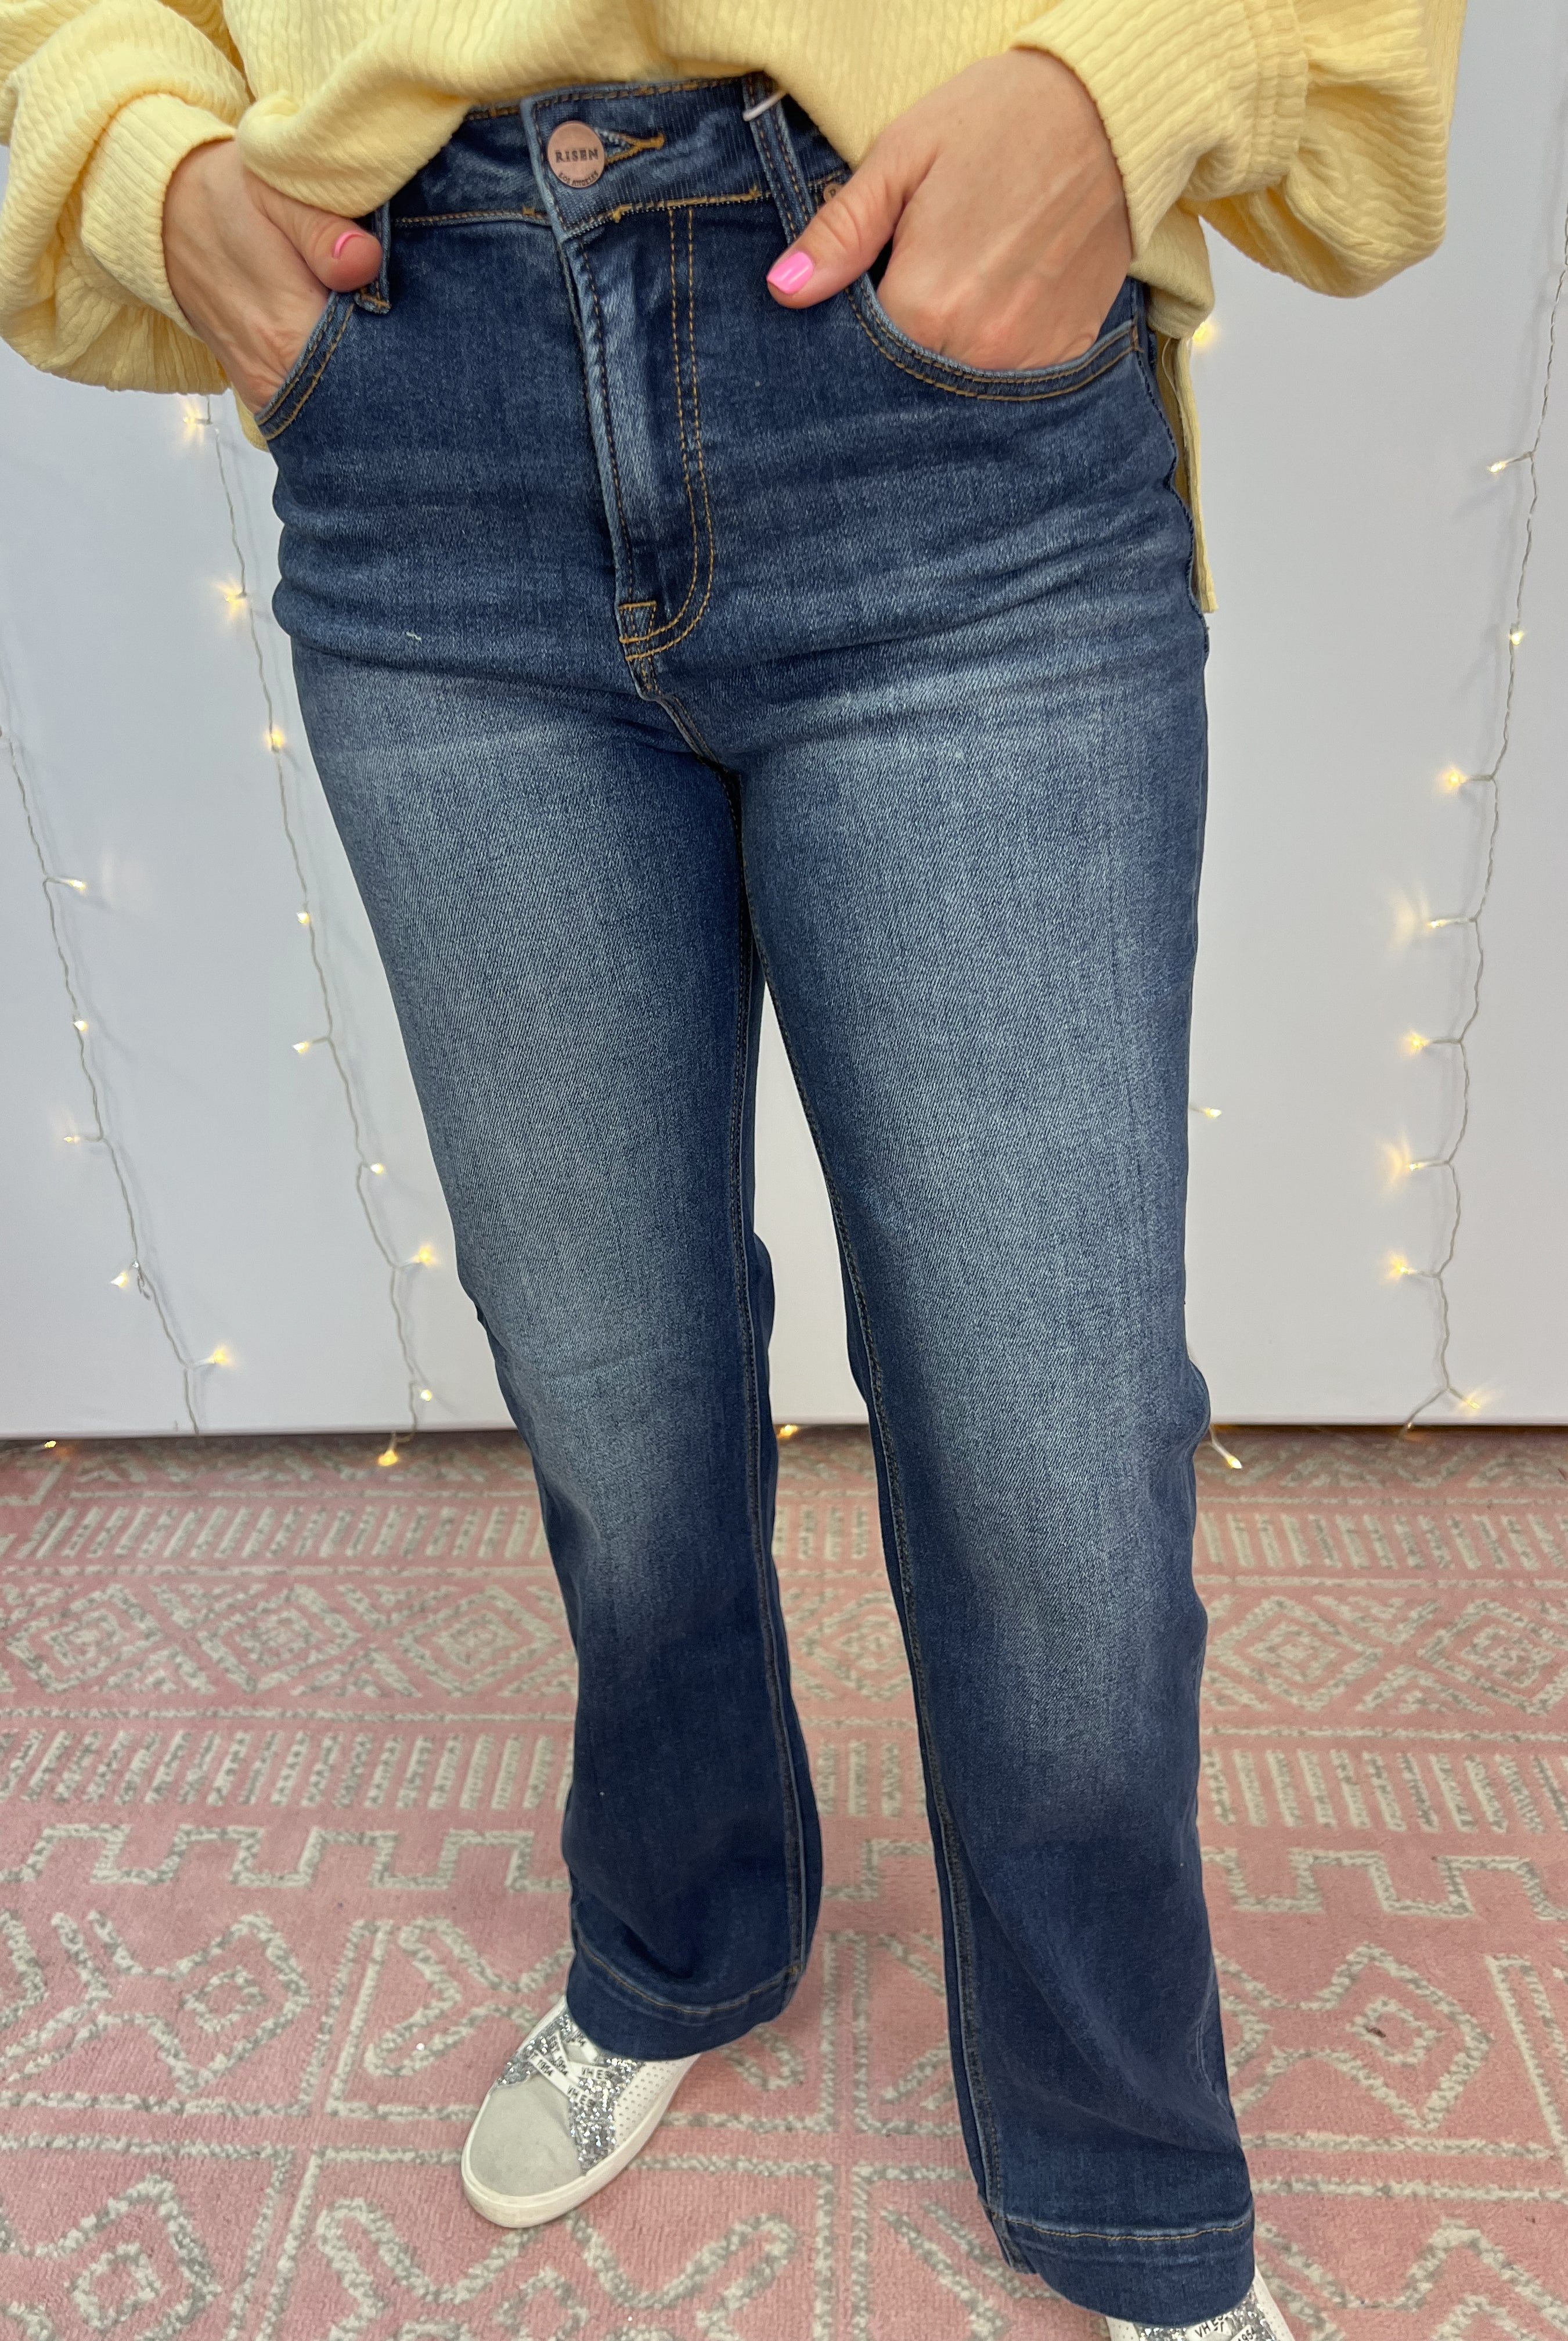 RISEN - High Rise Bootcut Dark Wash-Jeans-Risen-The Lovely Closet, Women's Fashion Boutique in Alexandria, KY